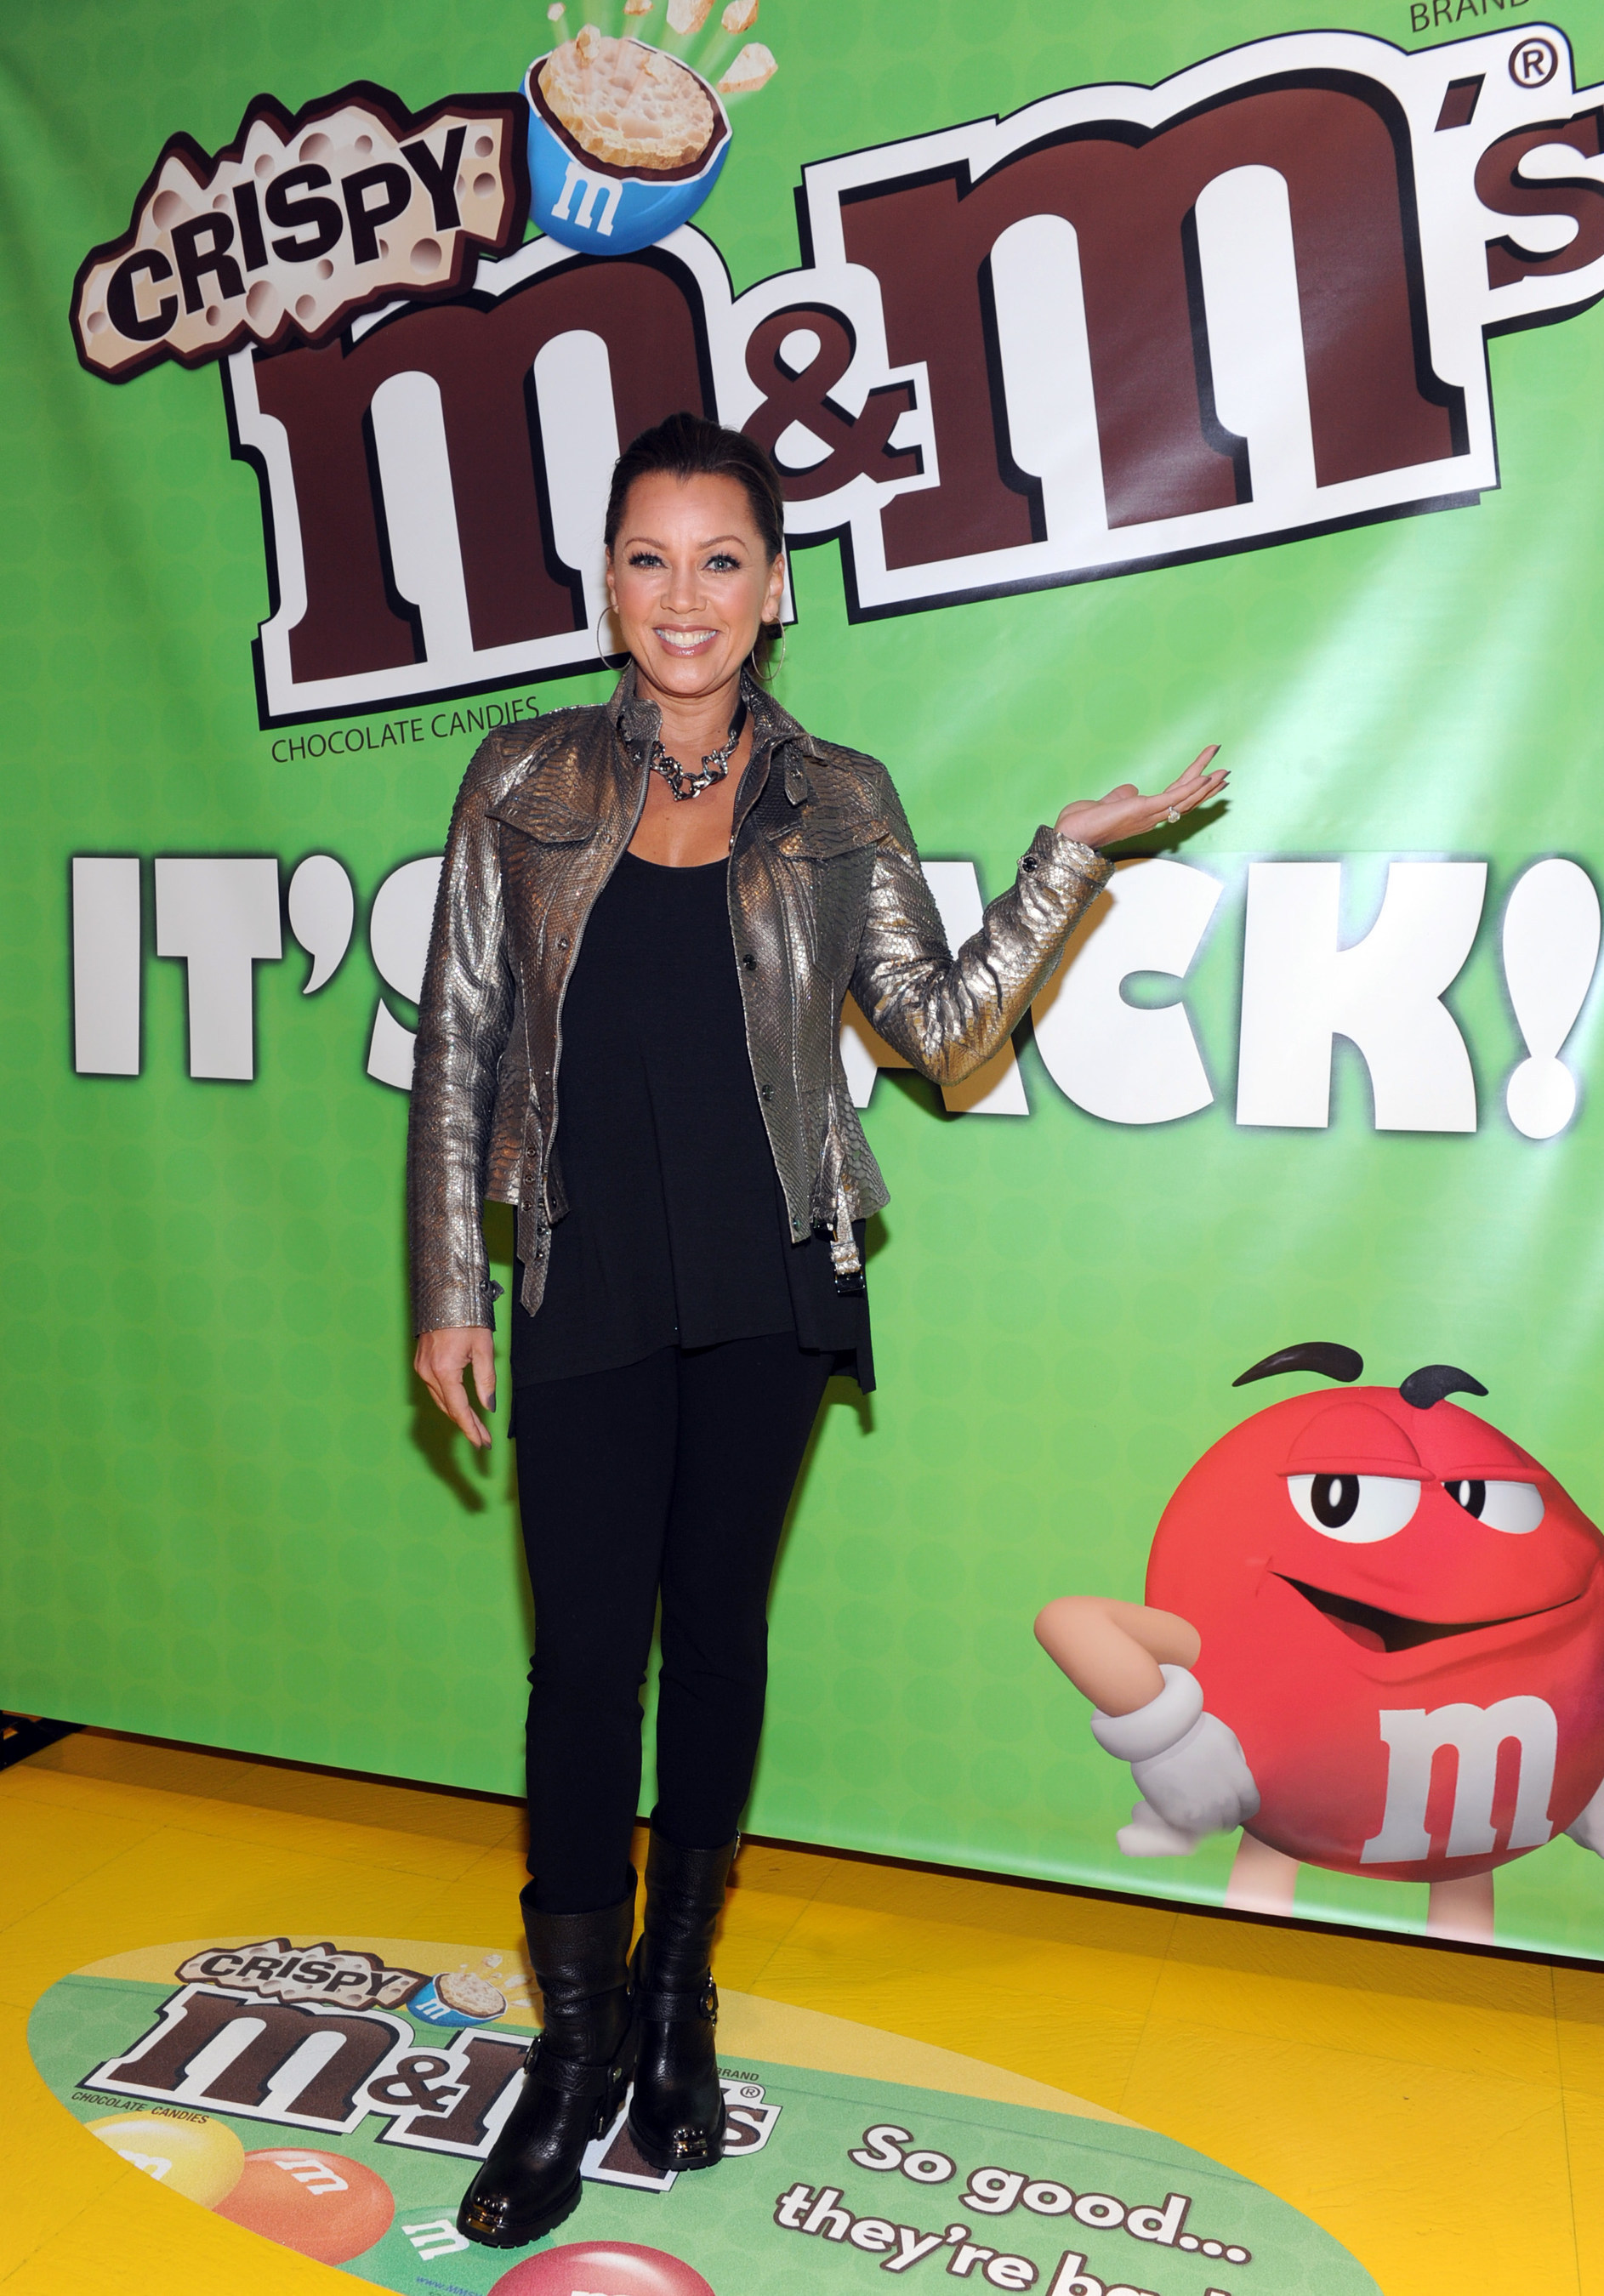 (December 9, 2014) Vanessa Williams, the multi-talented entertainer and voice behind M&M'S(R) Brand spokescandy Ms. Brown, welcomes the first batch of M&M'S(R) Crispy to M&M'S World(R) in Times Square. The product will begin returning to store shelves nationwide this week after a 10-year hiatus, thanks to a vocal fan base who pleaded for its return. (Photo by Diane Bondareff for Mars Chocolate North America)